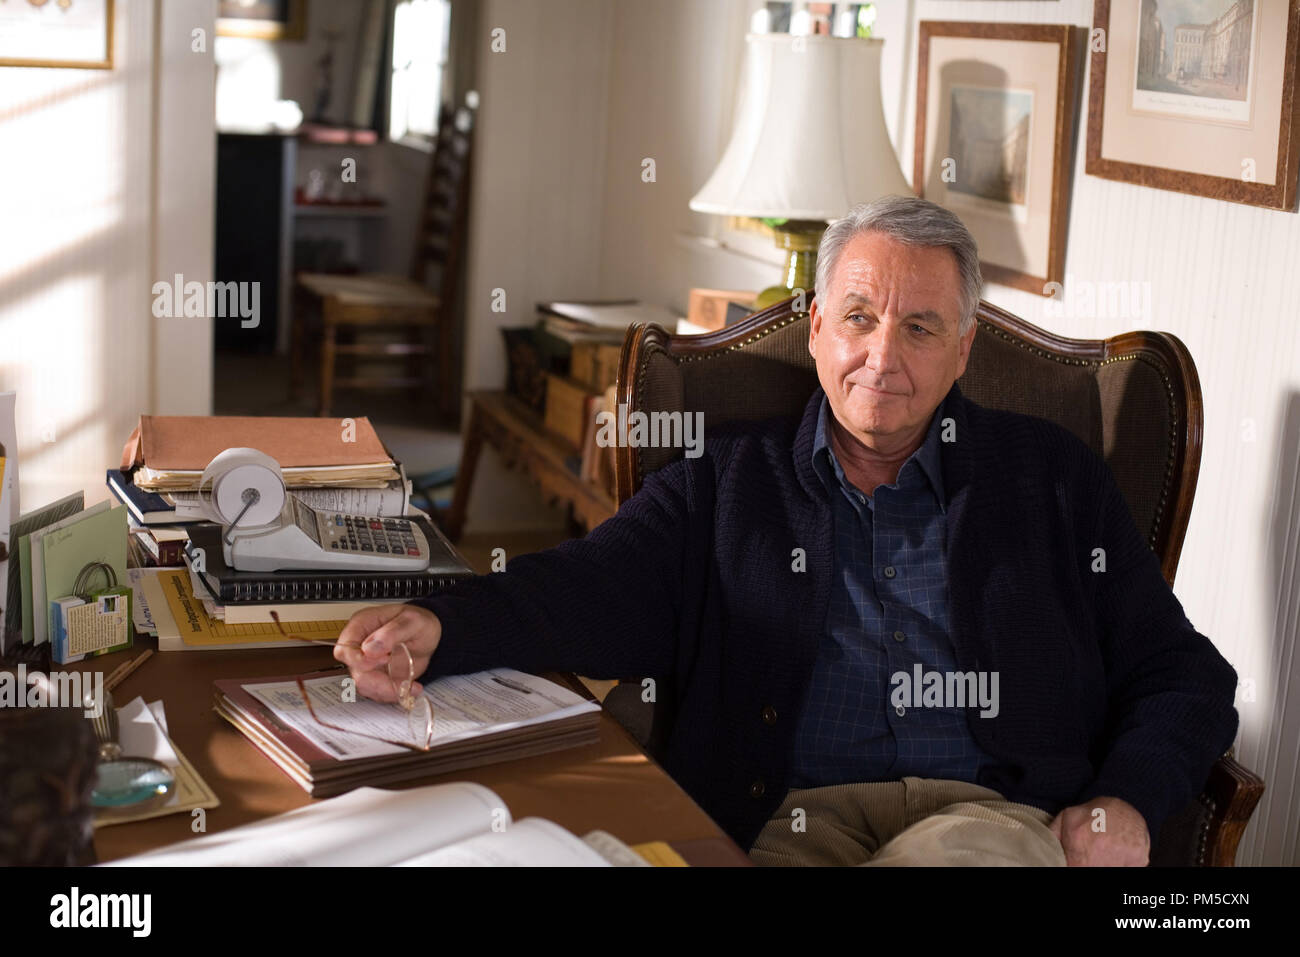 Film Still / Publicity Still from 'Fracture' Bob Gunton © 2007 New Line Cinema Photo Credit: Sam Emerson   File Reference # 307361285THA  For Editorial Use Only -  All Rights Reserved Stock Photo